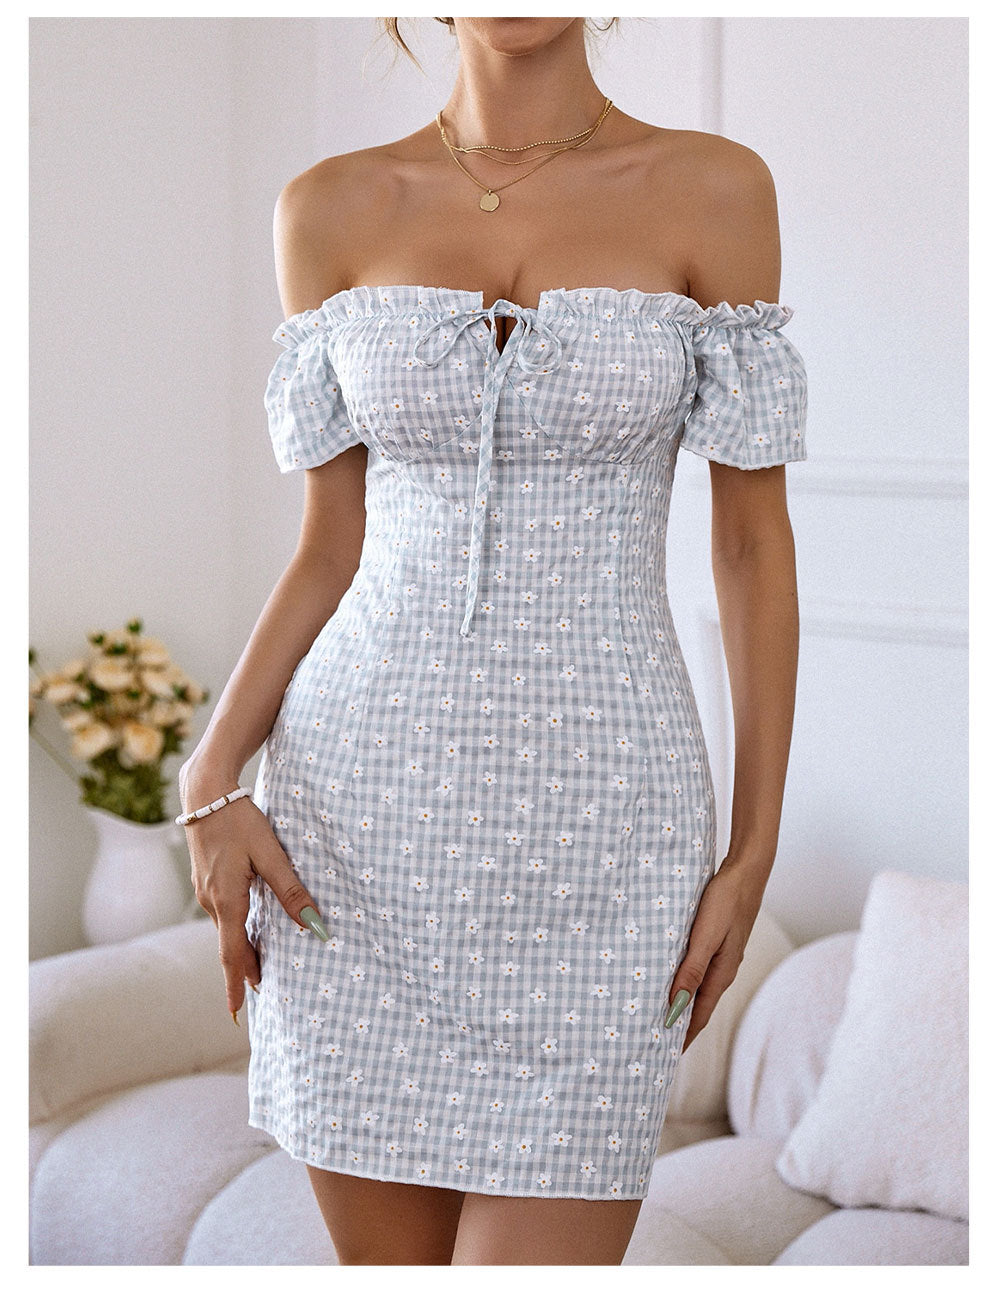 Sexy Floral Short Dress Women Summer Casual Slim Backless Off Shoulder Beach Dress Fashion White Lace-up New In Dresses 2023   61.99 EZYSELLA SHOP